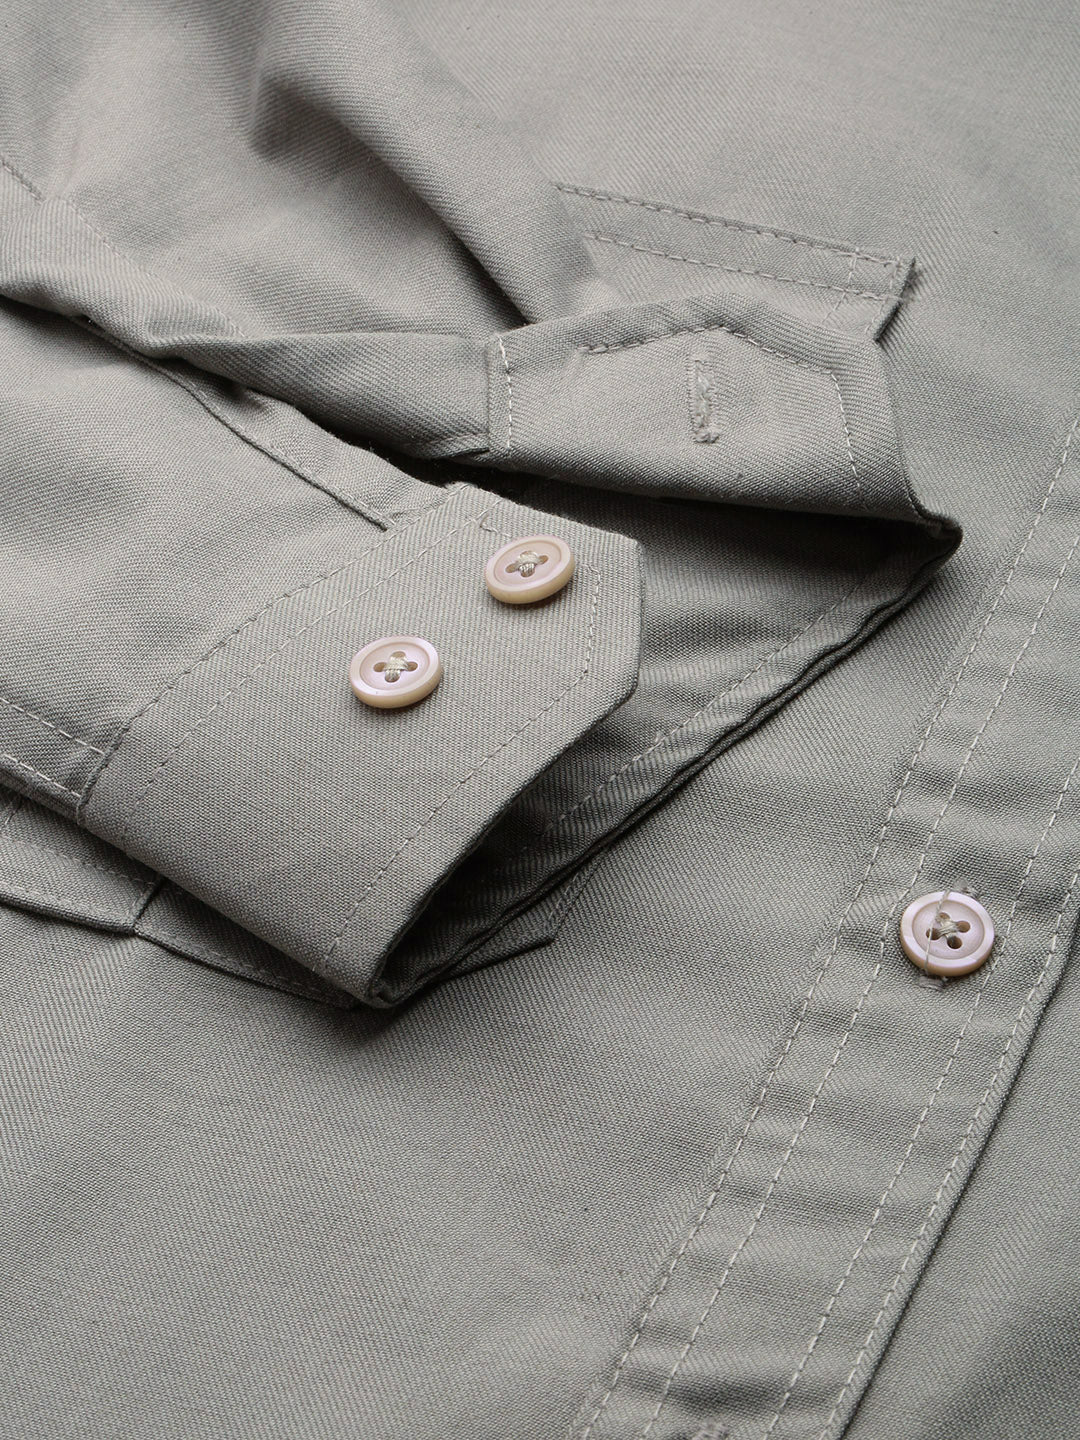 Men Spread Collar Solid Taupe Shirt